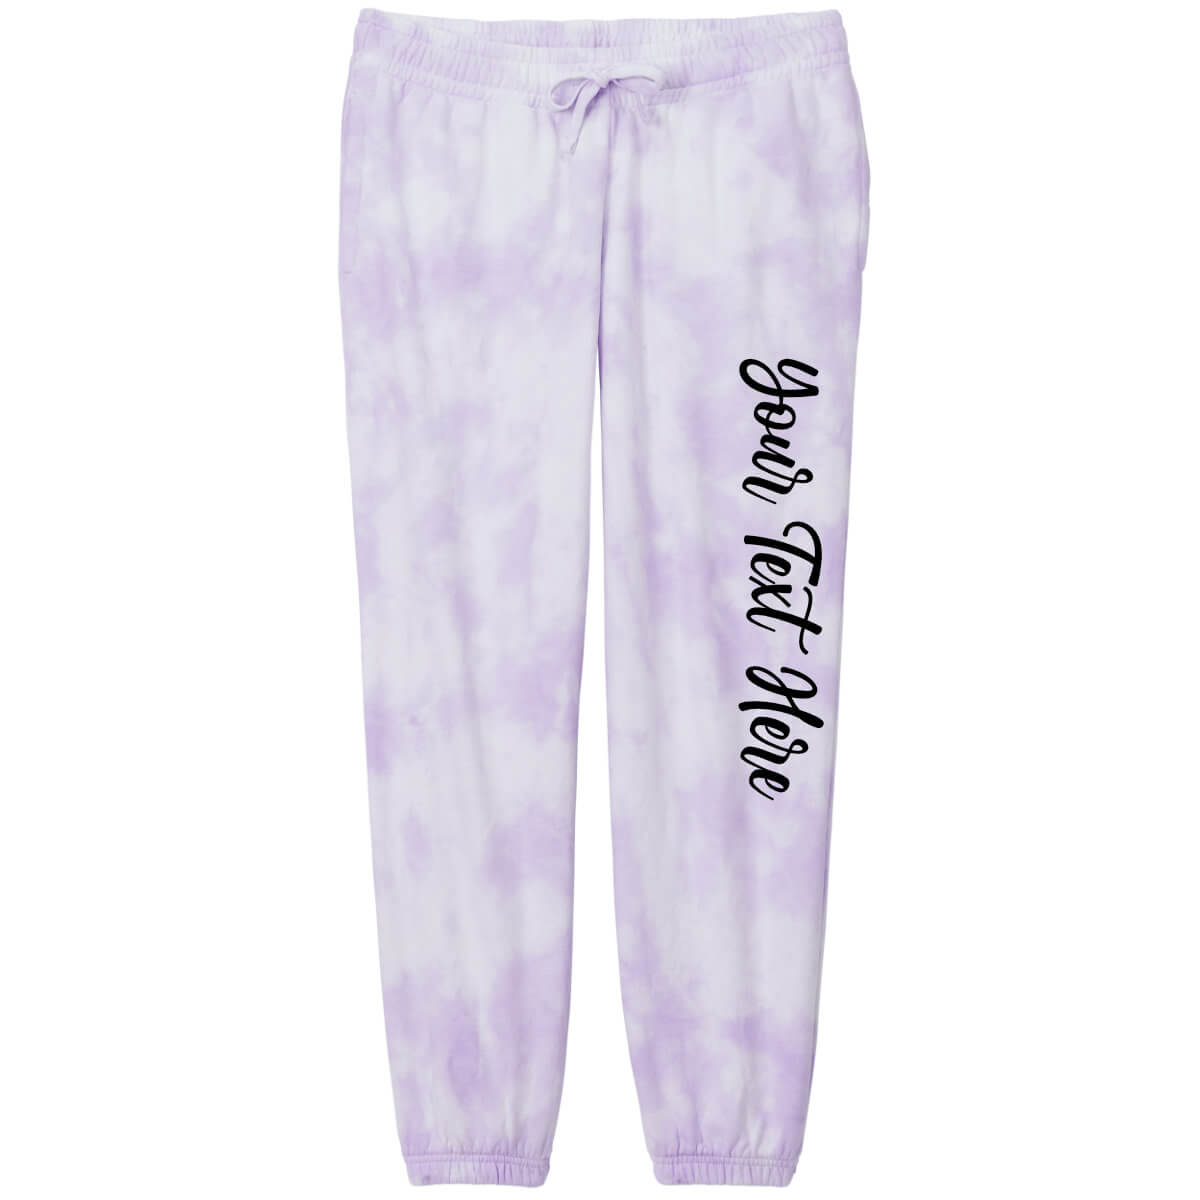 Create Your Own Cloud Bridal Party Joggers - Personalized Brides